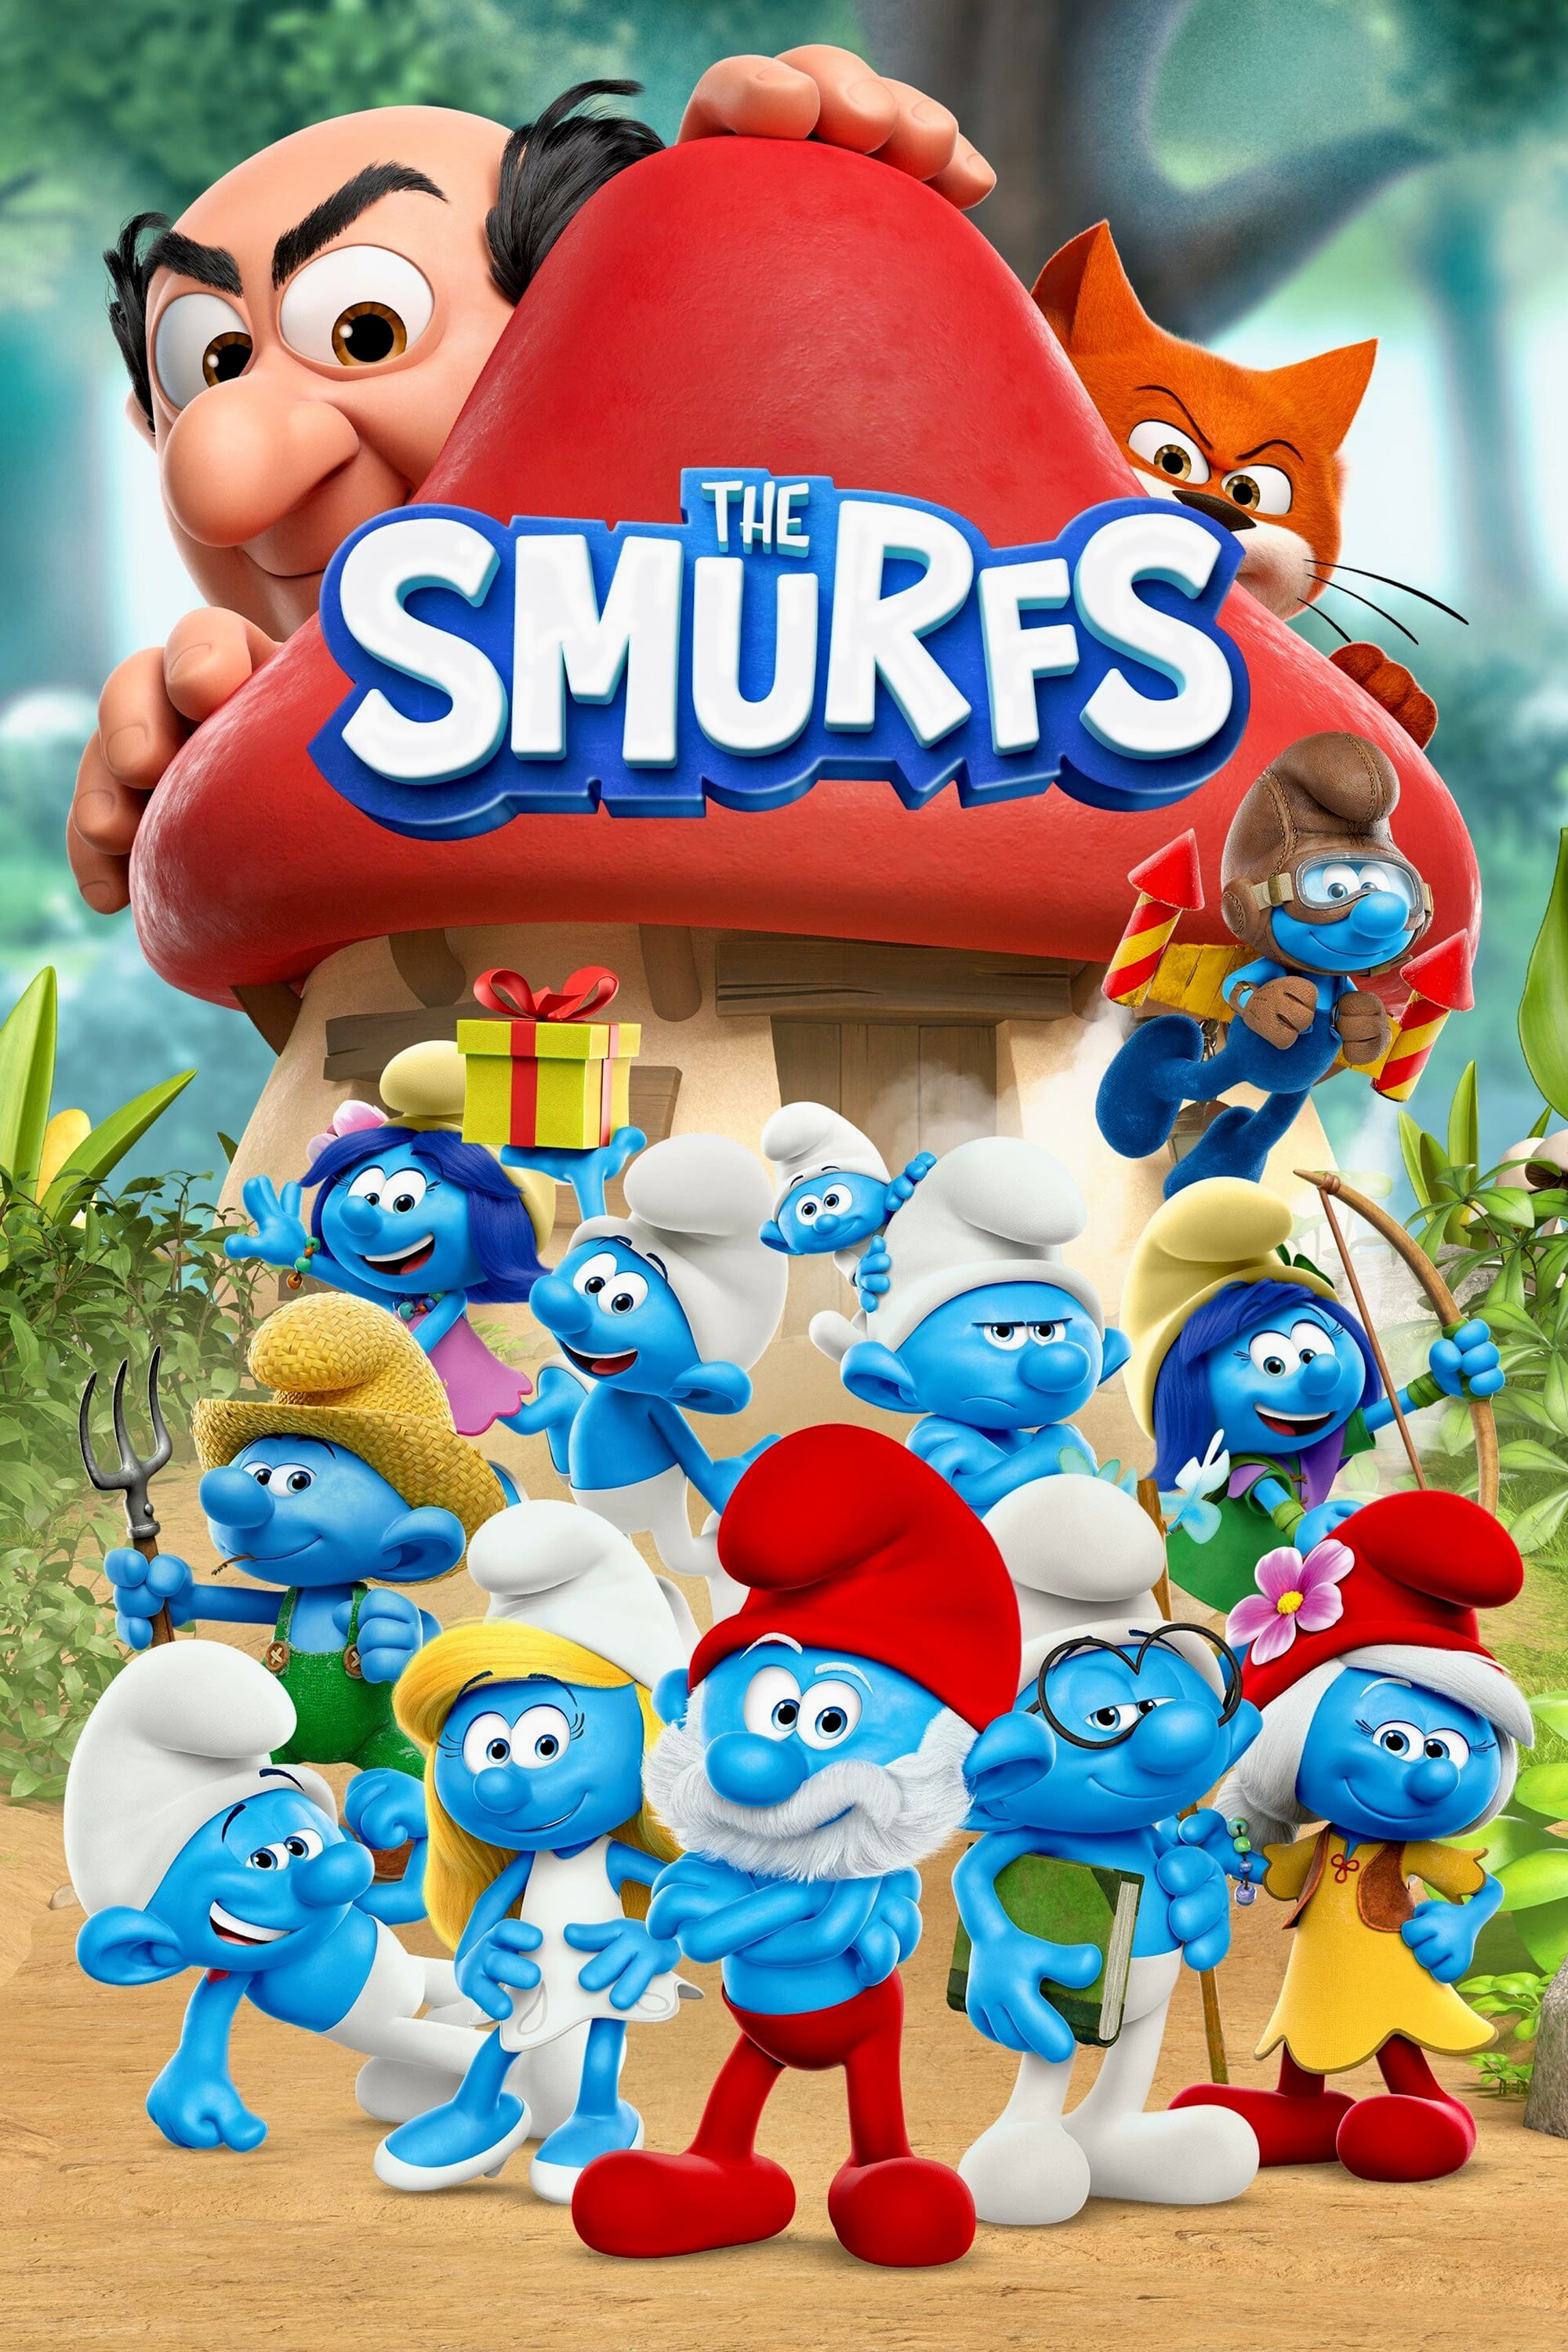 christiane doring recommends a picture of a smurf pic